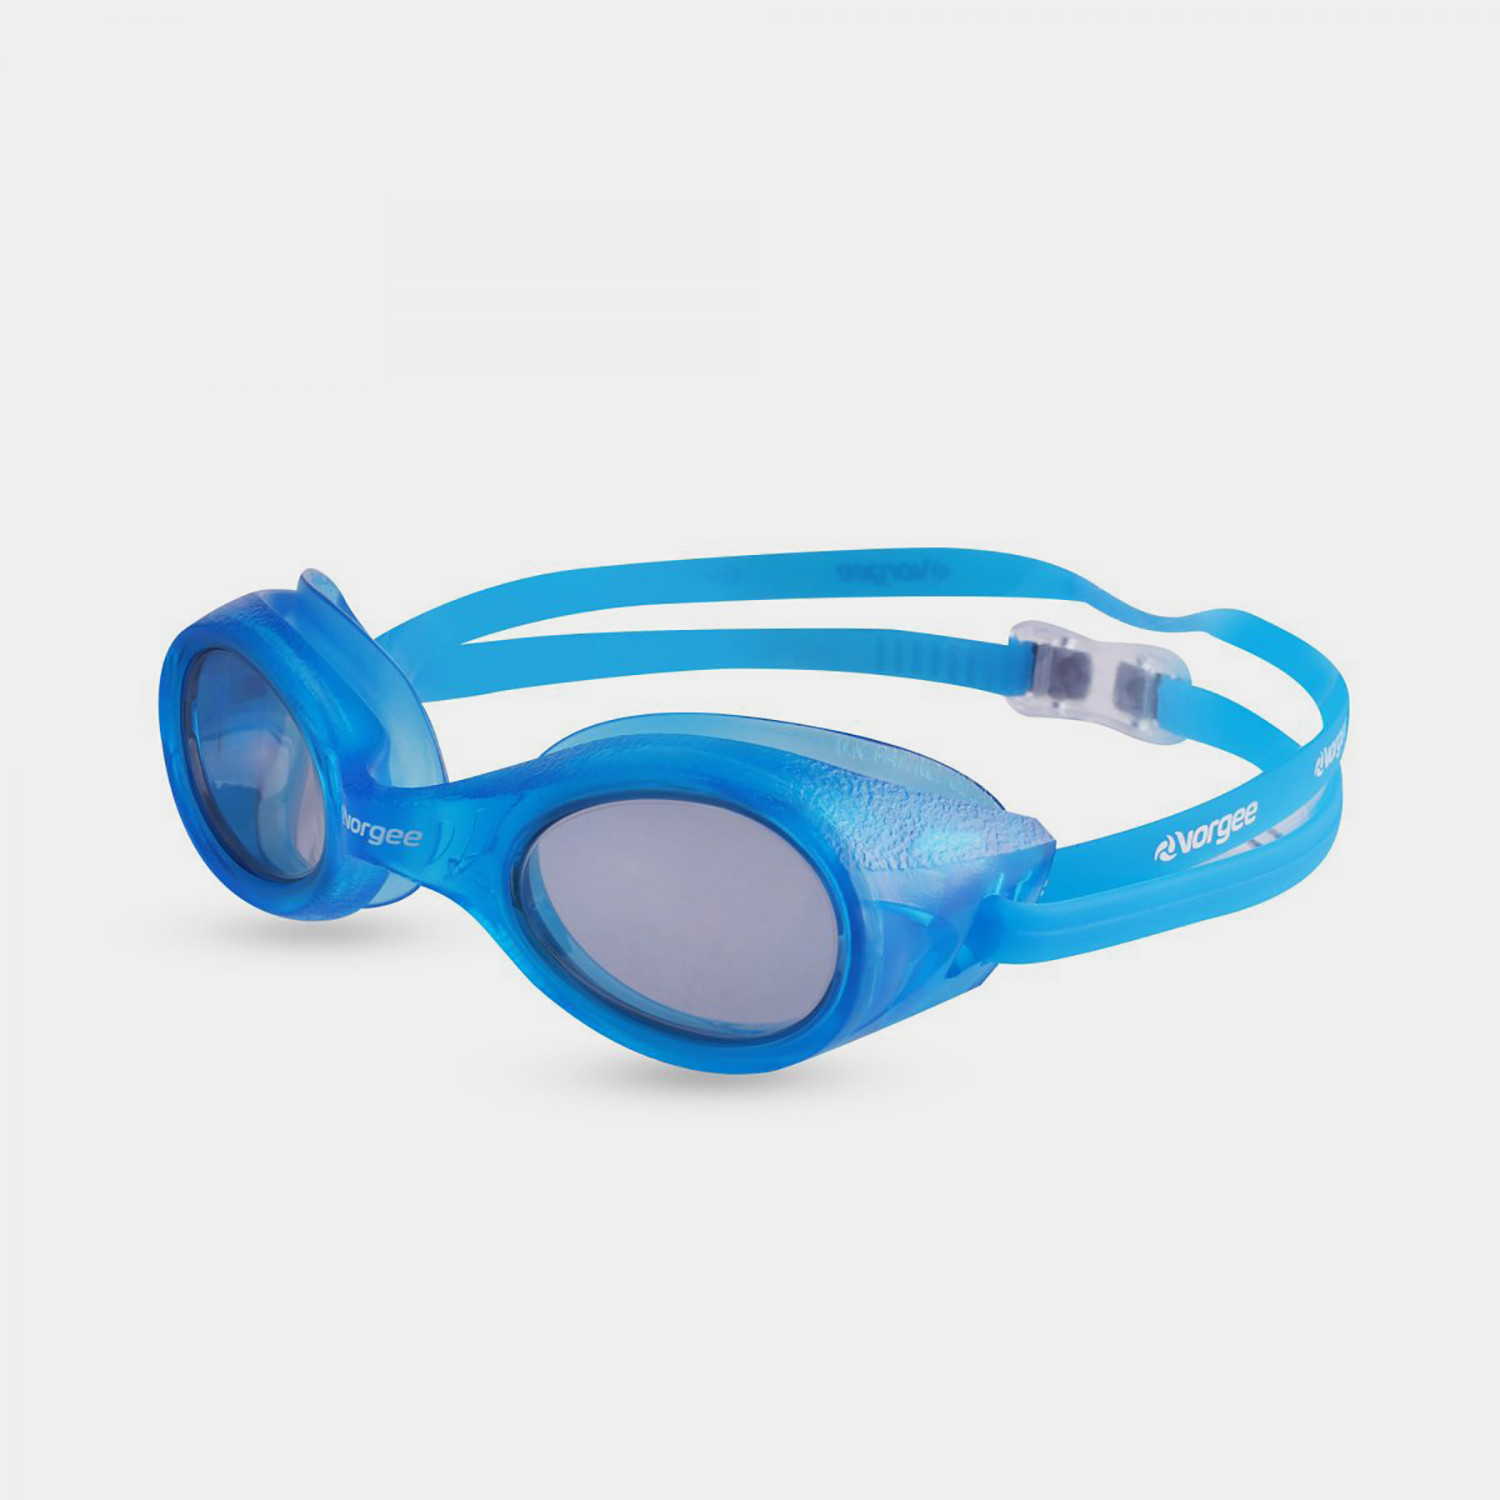 Vorgee Voyager Tinted Assorted Unisex Goggles (9000053559_102)